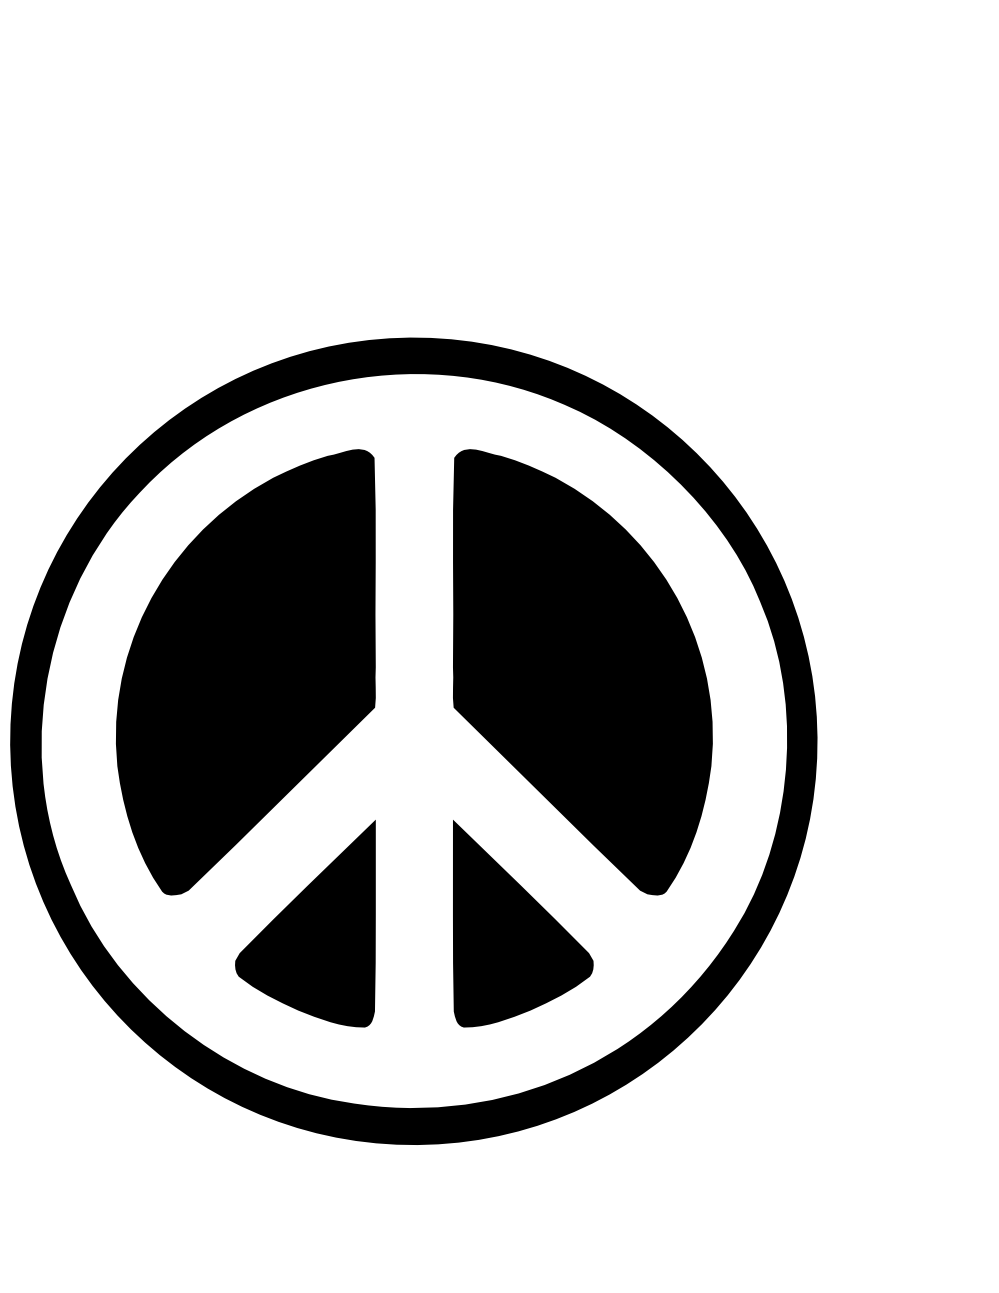 Bw Peace Symbol peacesymbol.org Scalable Vector Graphics SVG ...